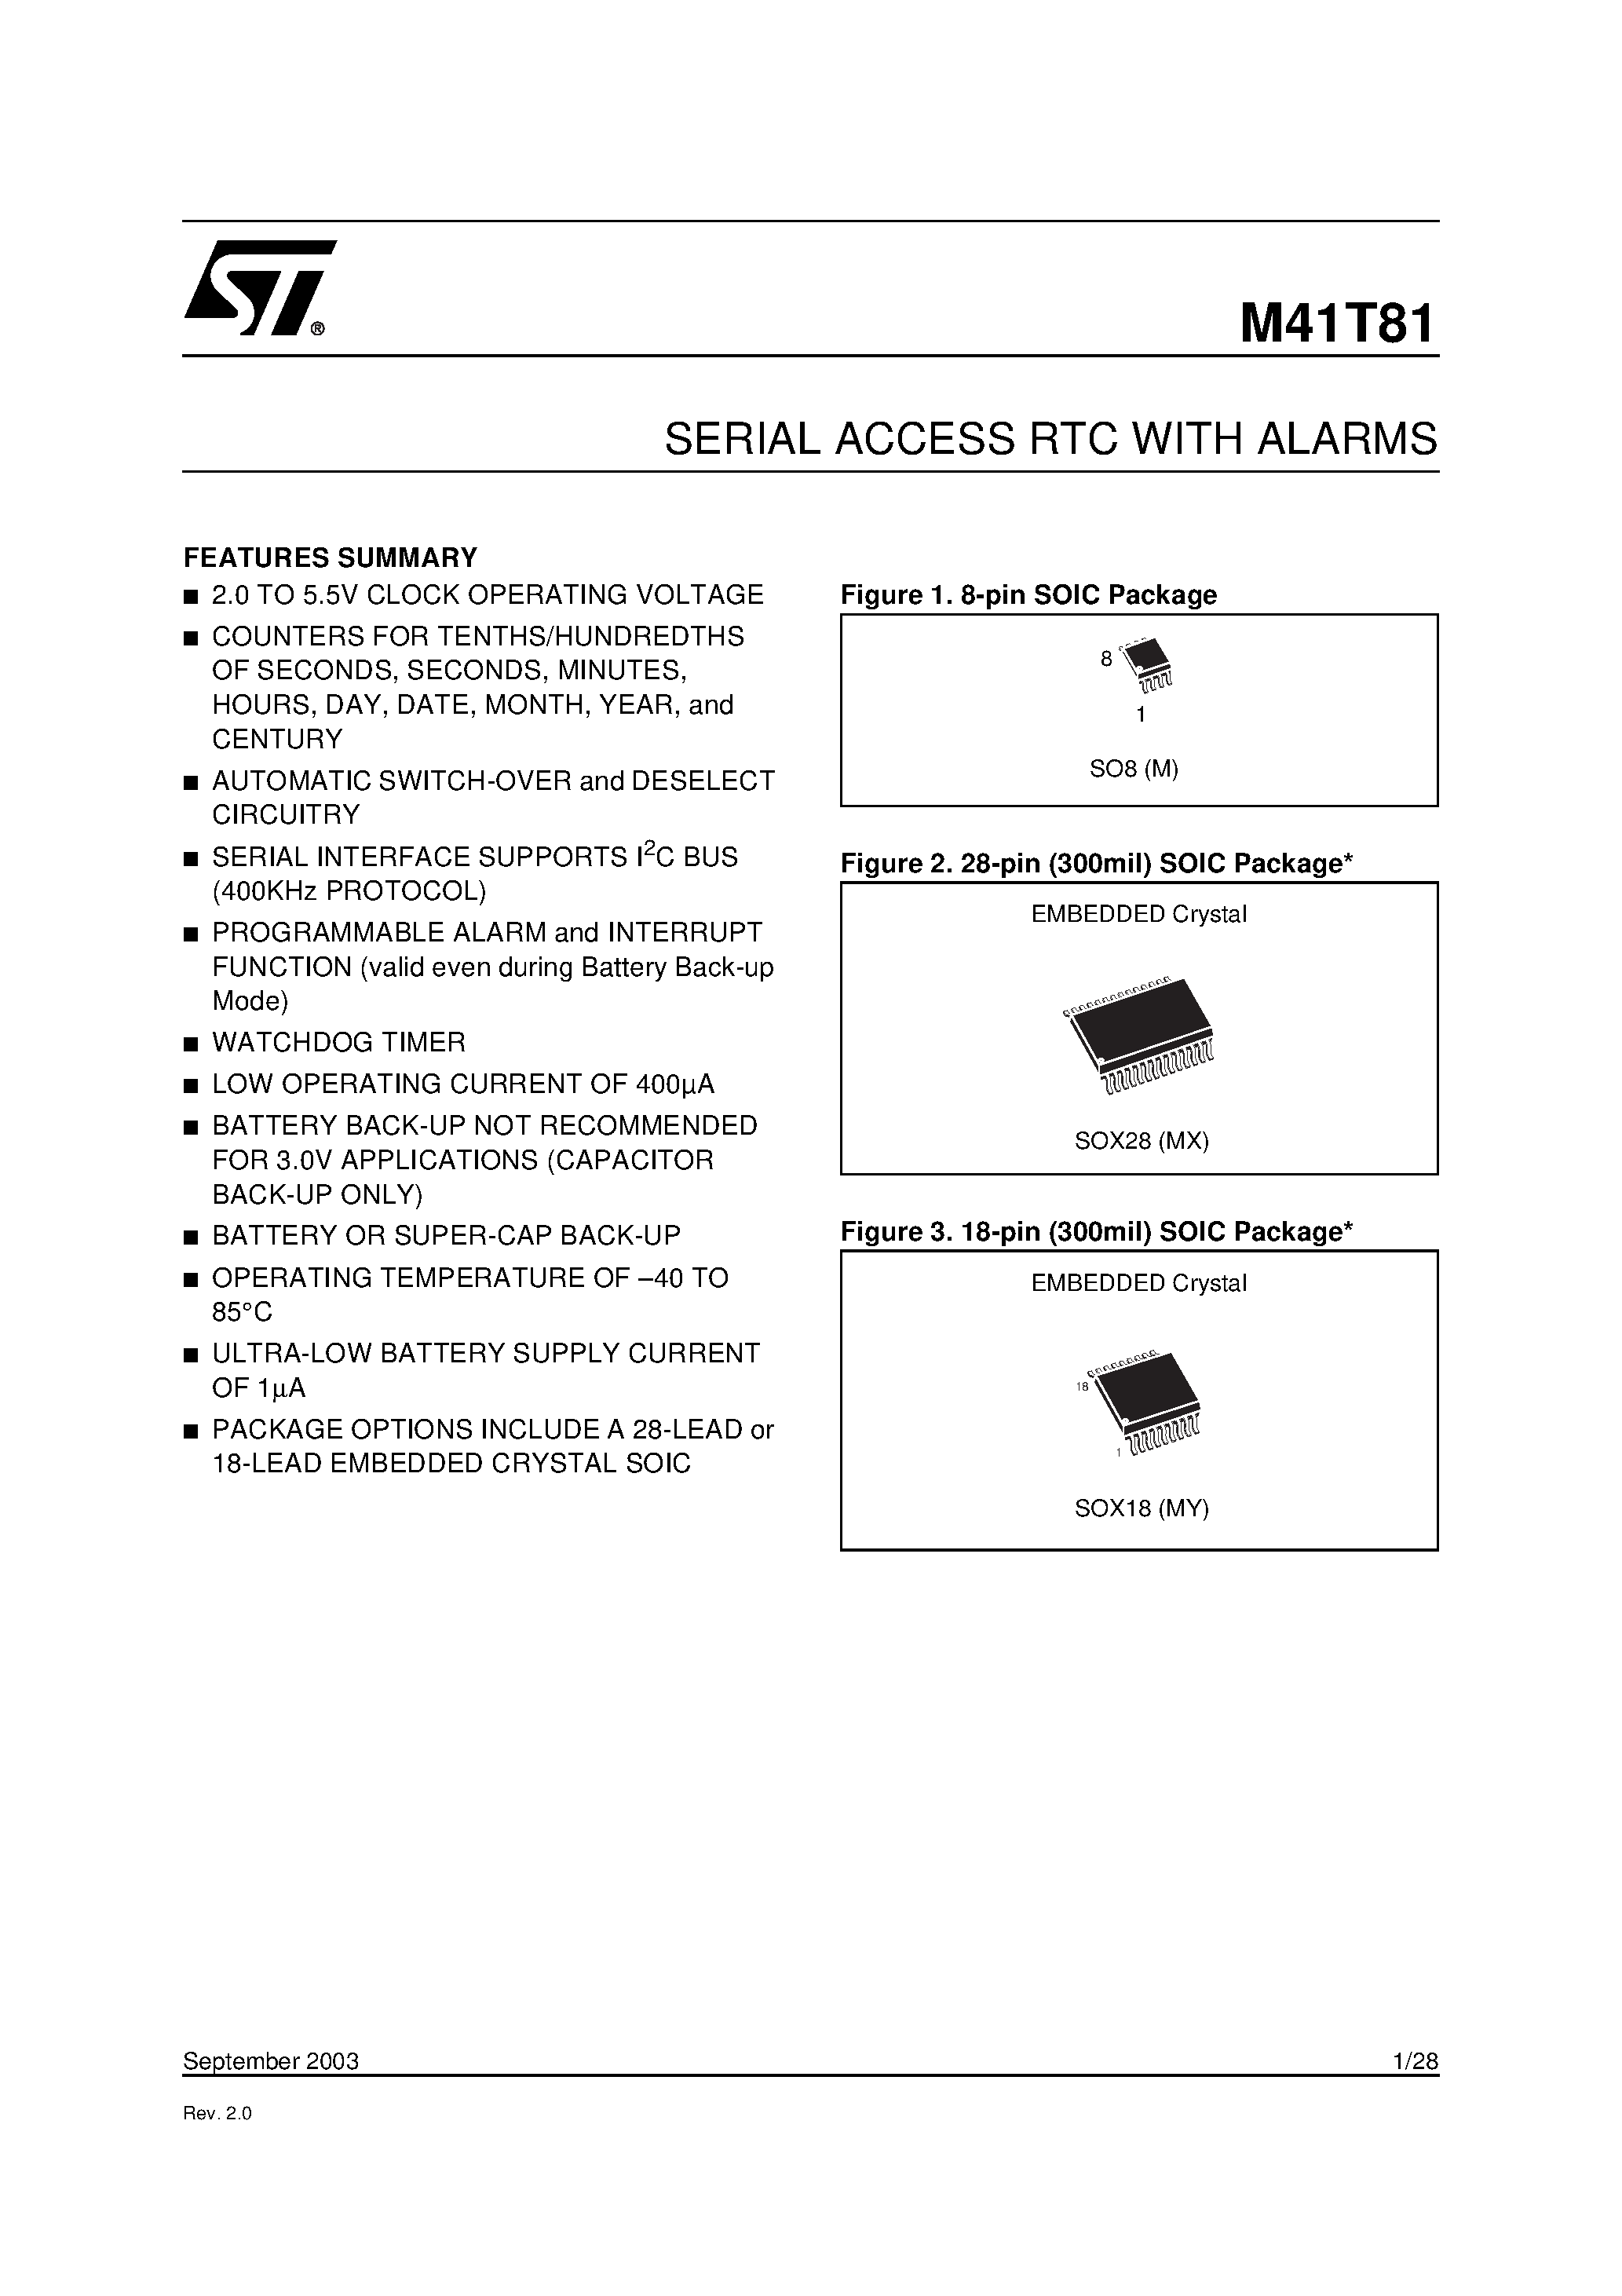 Datasheet M41T81M - SERIAL ACCESS RTC WITH ALARMS page 1